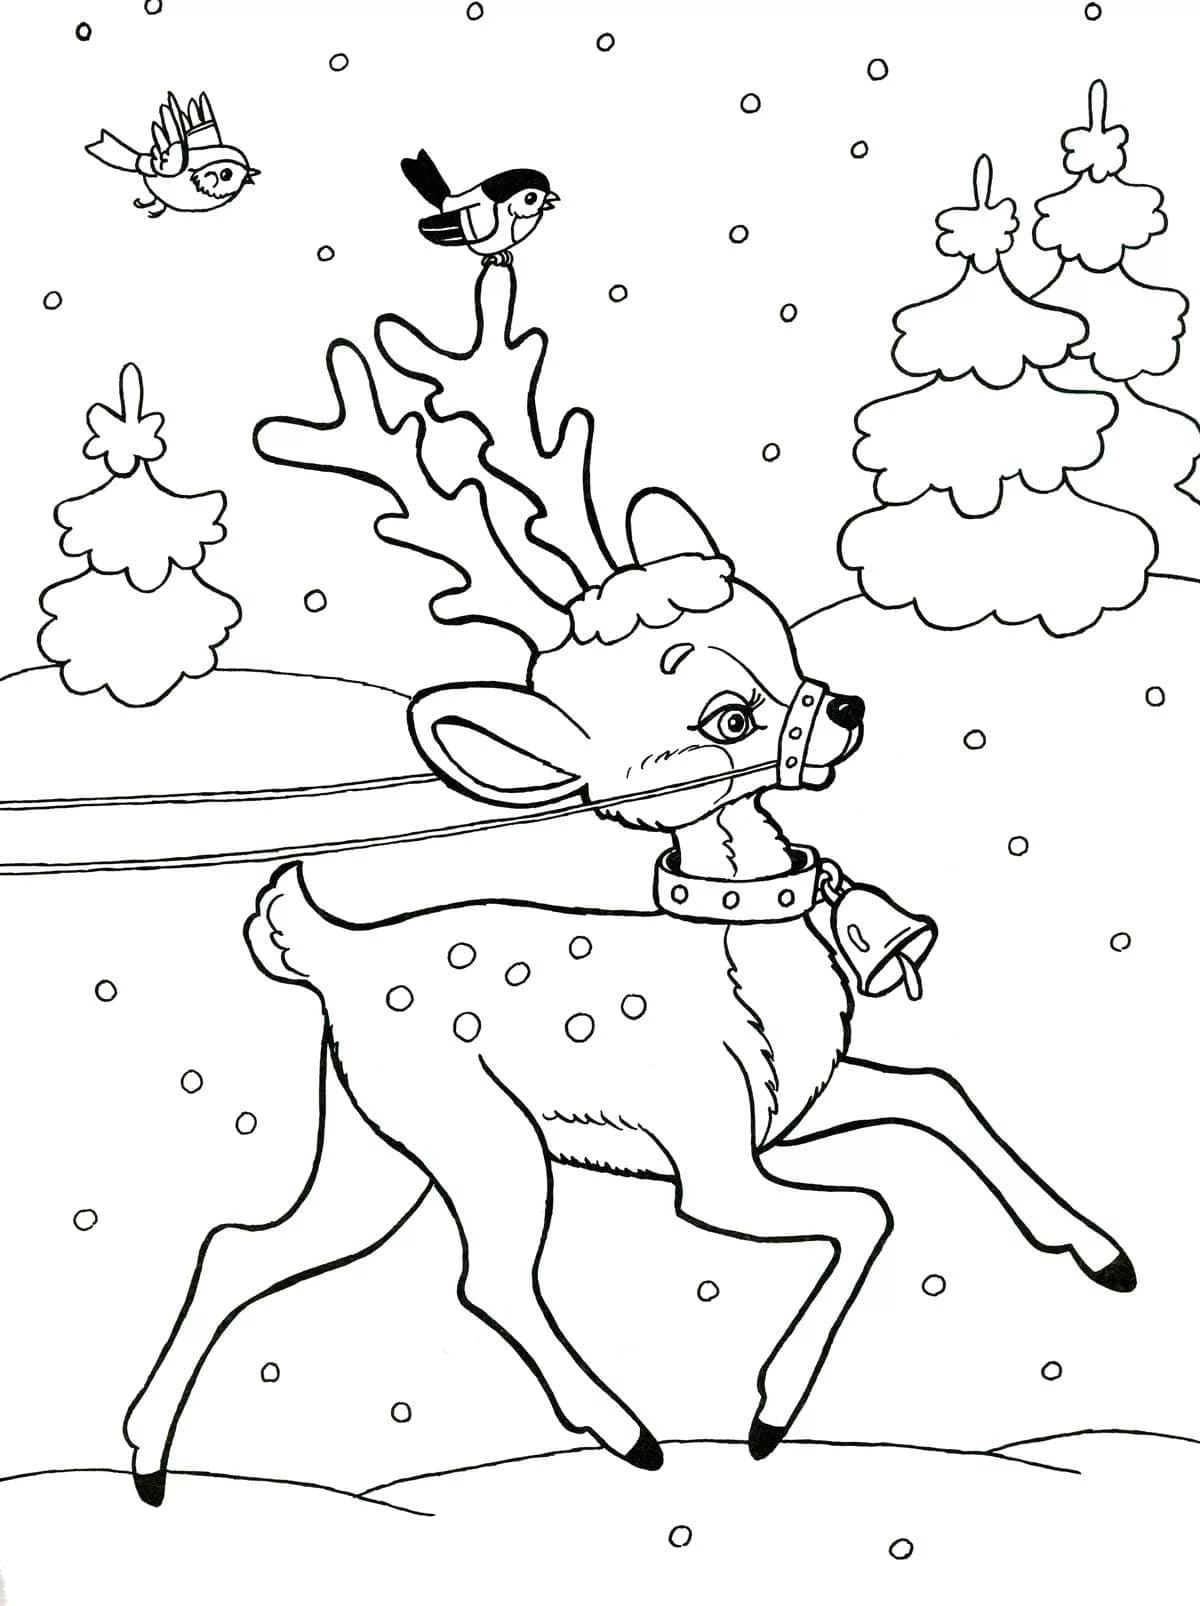 Christmas Reindeer Coloring Pages. 100 New Images Free Printable